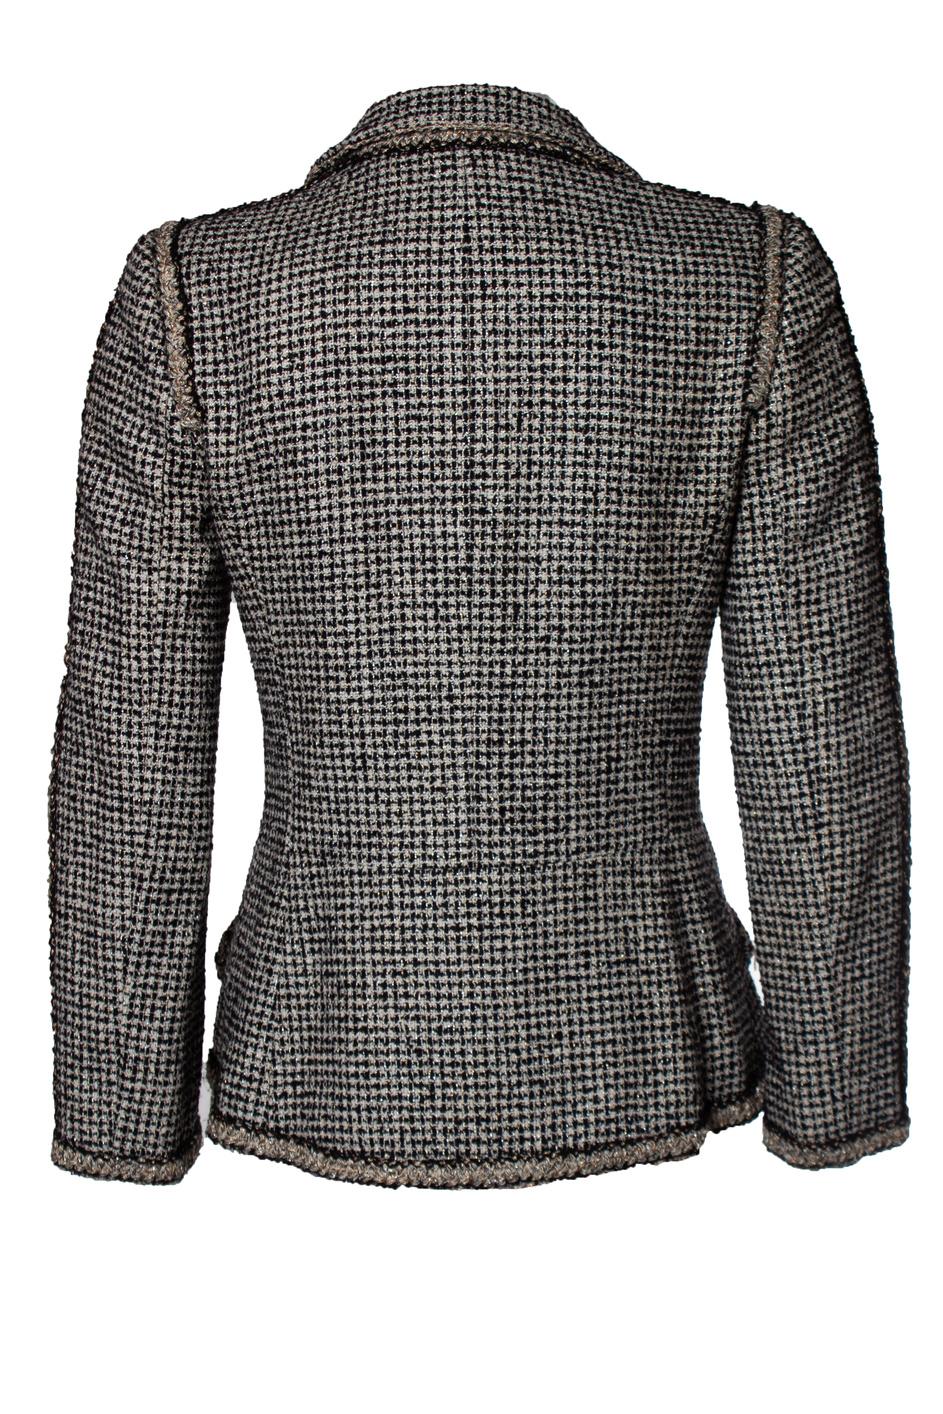 Chanel, black and gold tweed jacket In Good Condition For Sale In AMSTERDAM, NL